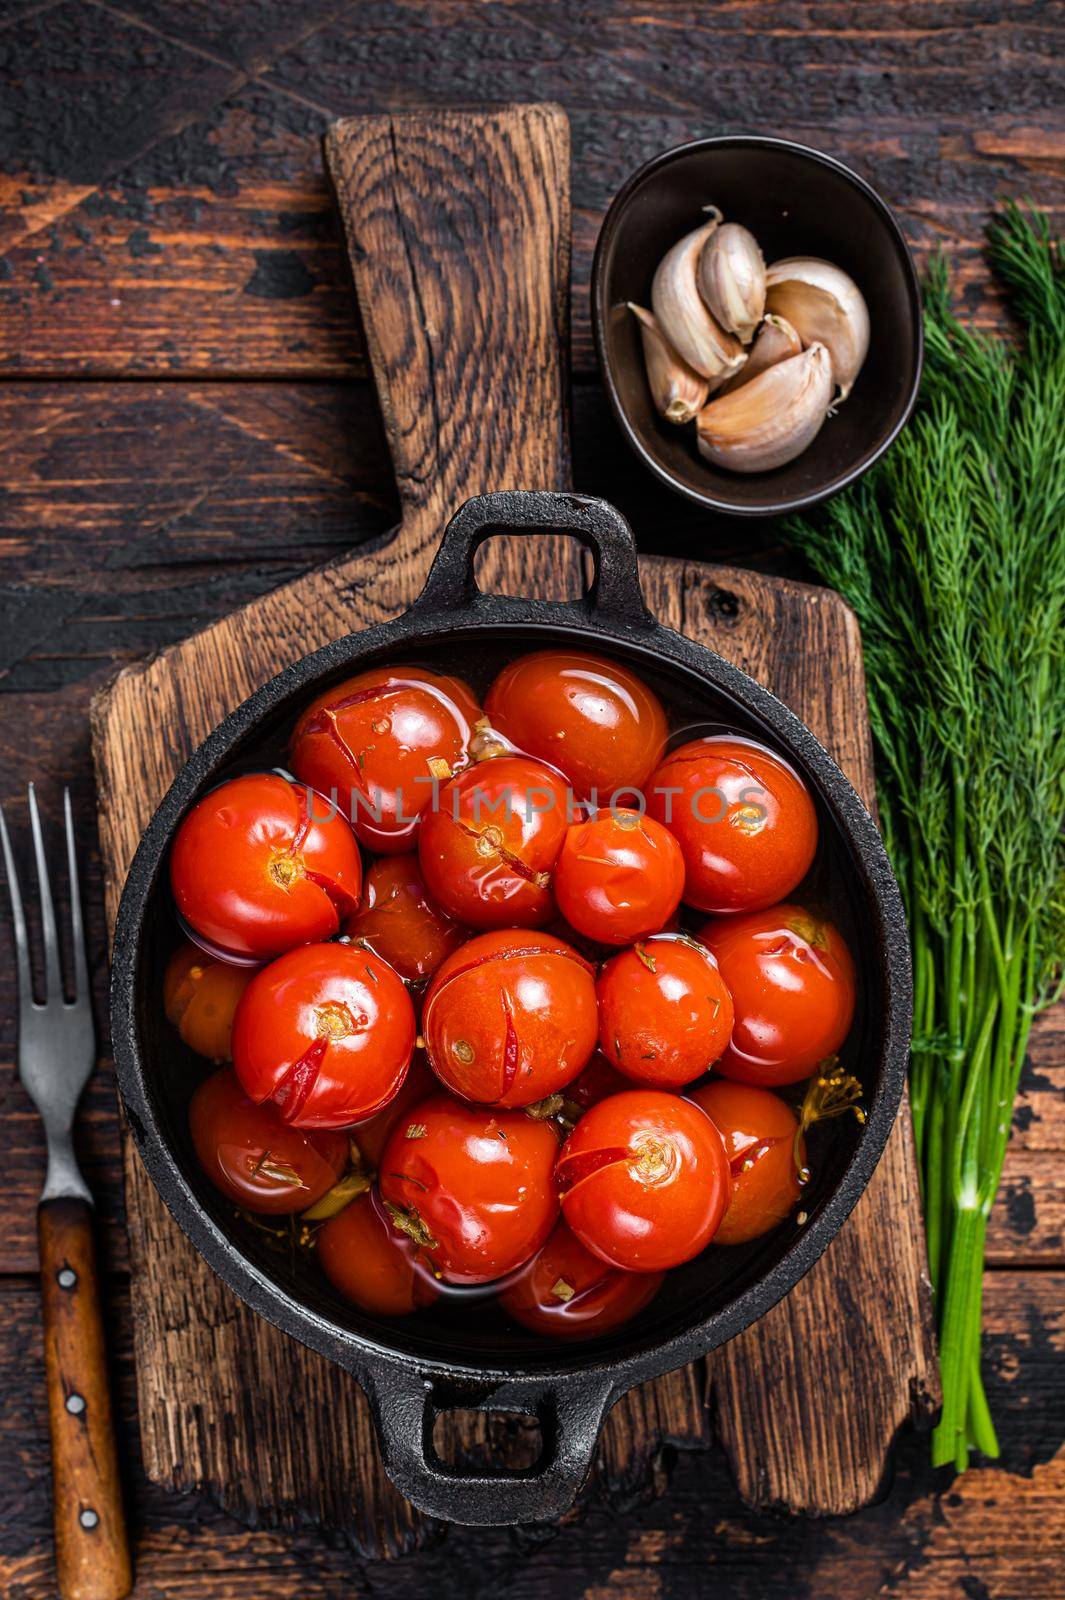 Salted Pickled cherry tomatoes in a pan with herbs and dill. Dark wooden background. Top view.